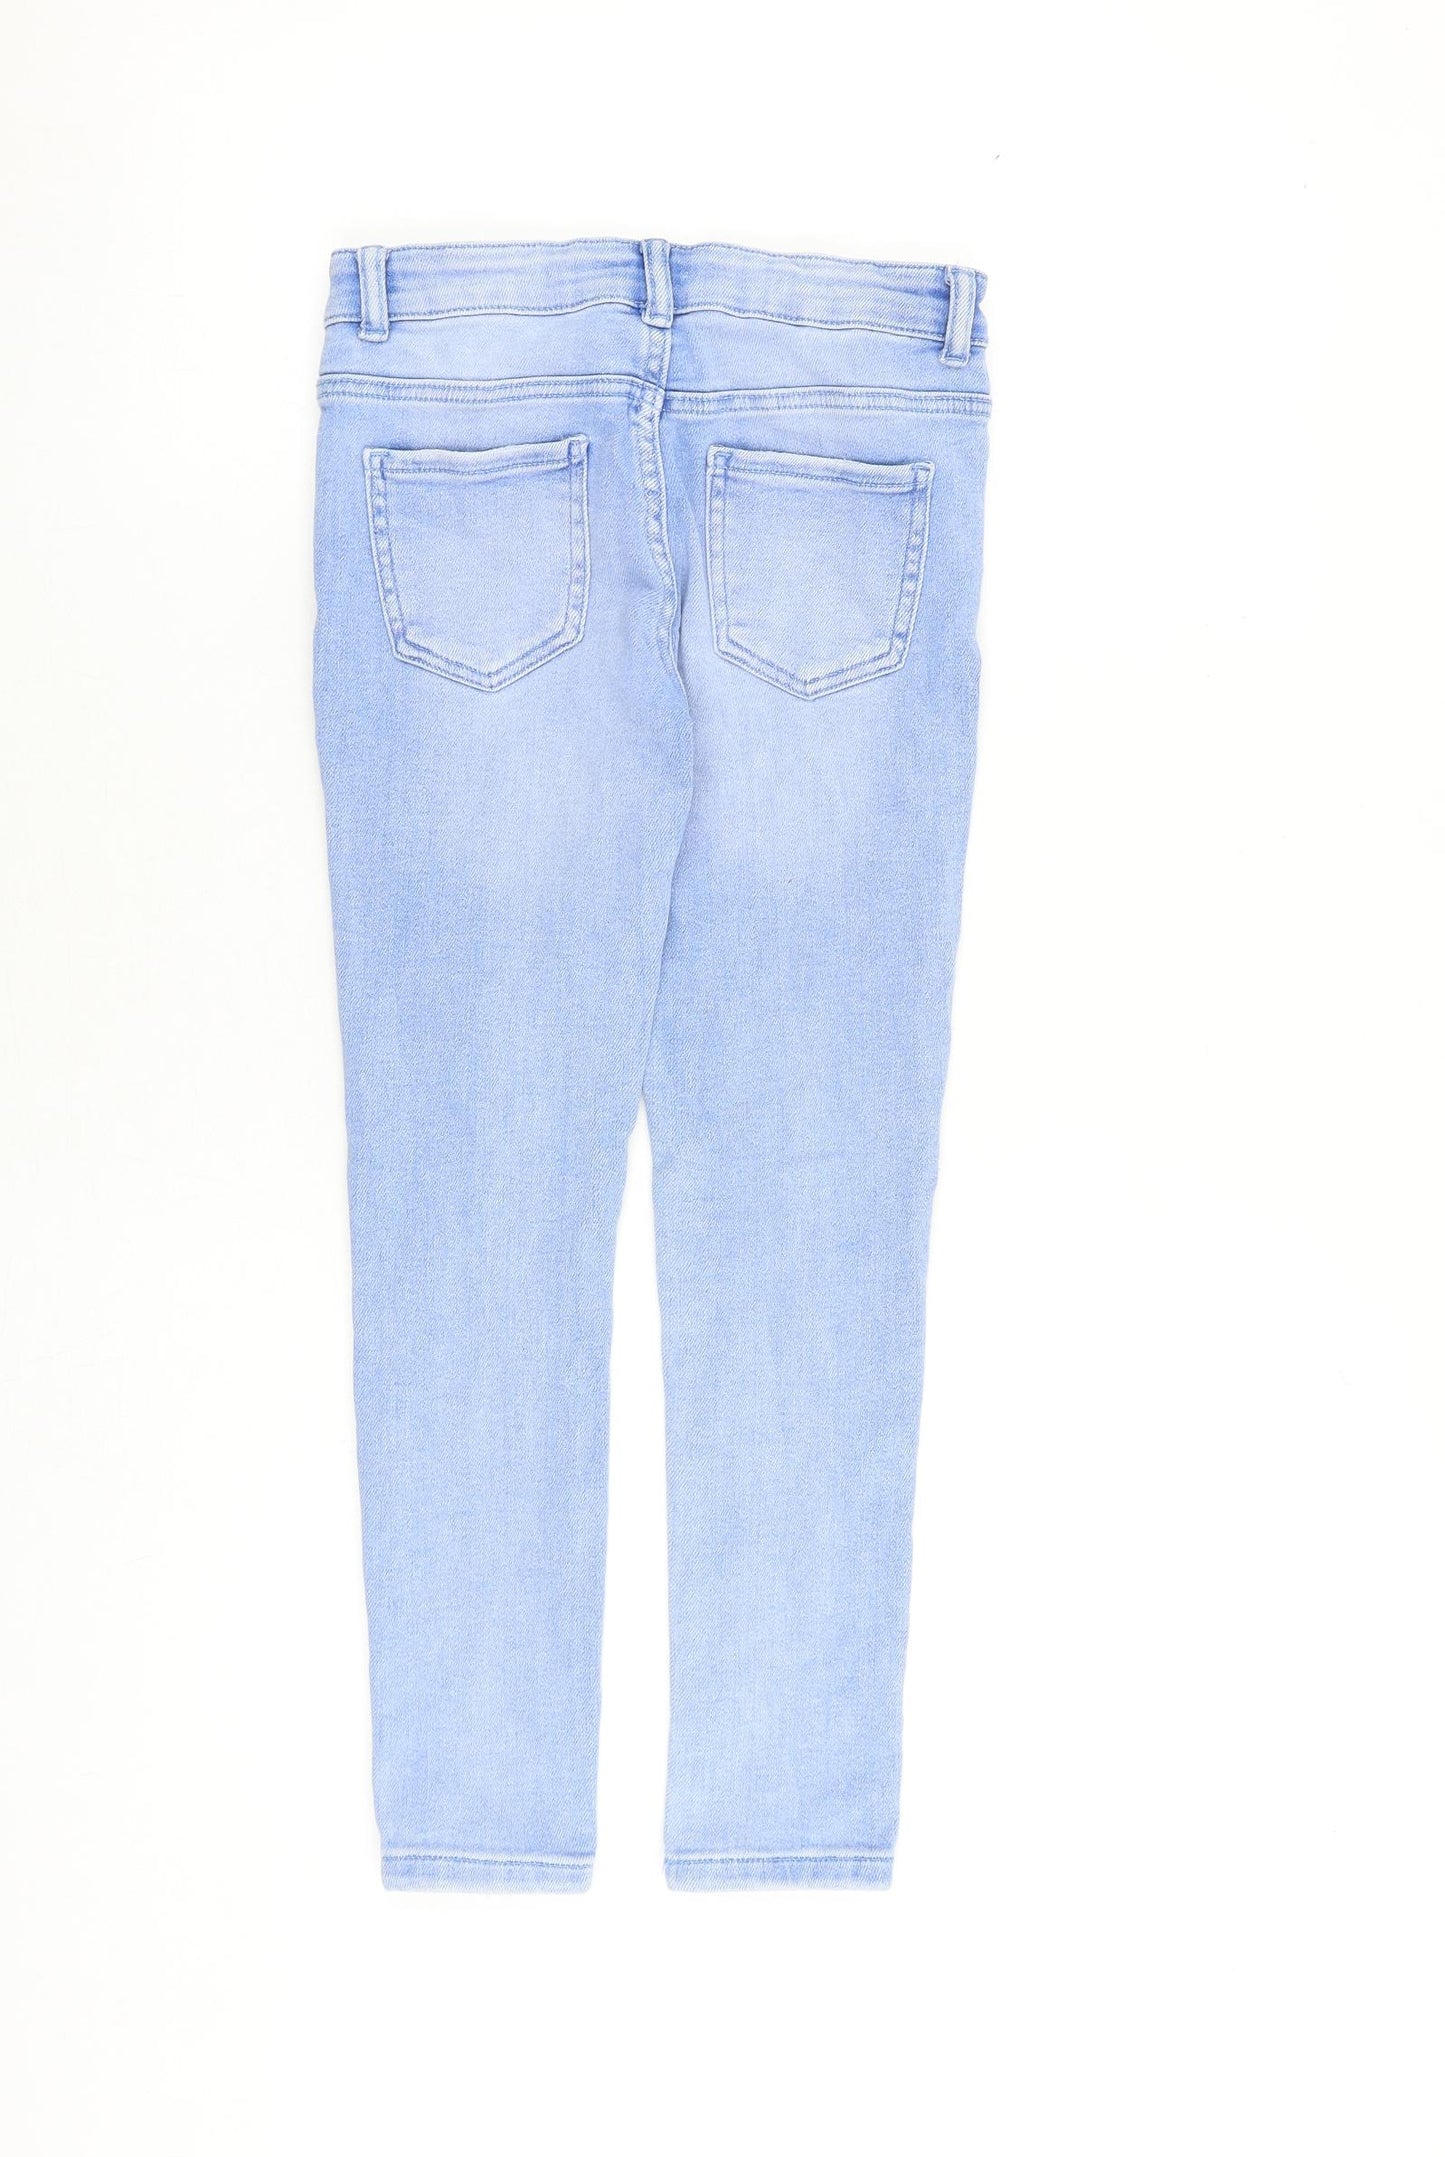 Denim & Co. Girls Blue Cotton Skinny Jeans Size 9-10 Years L25 in Slim Zip - Distressed